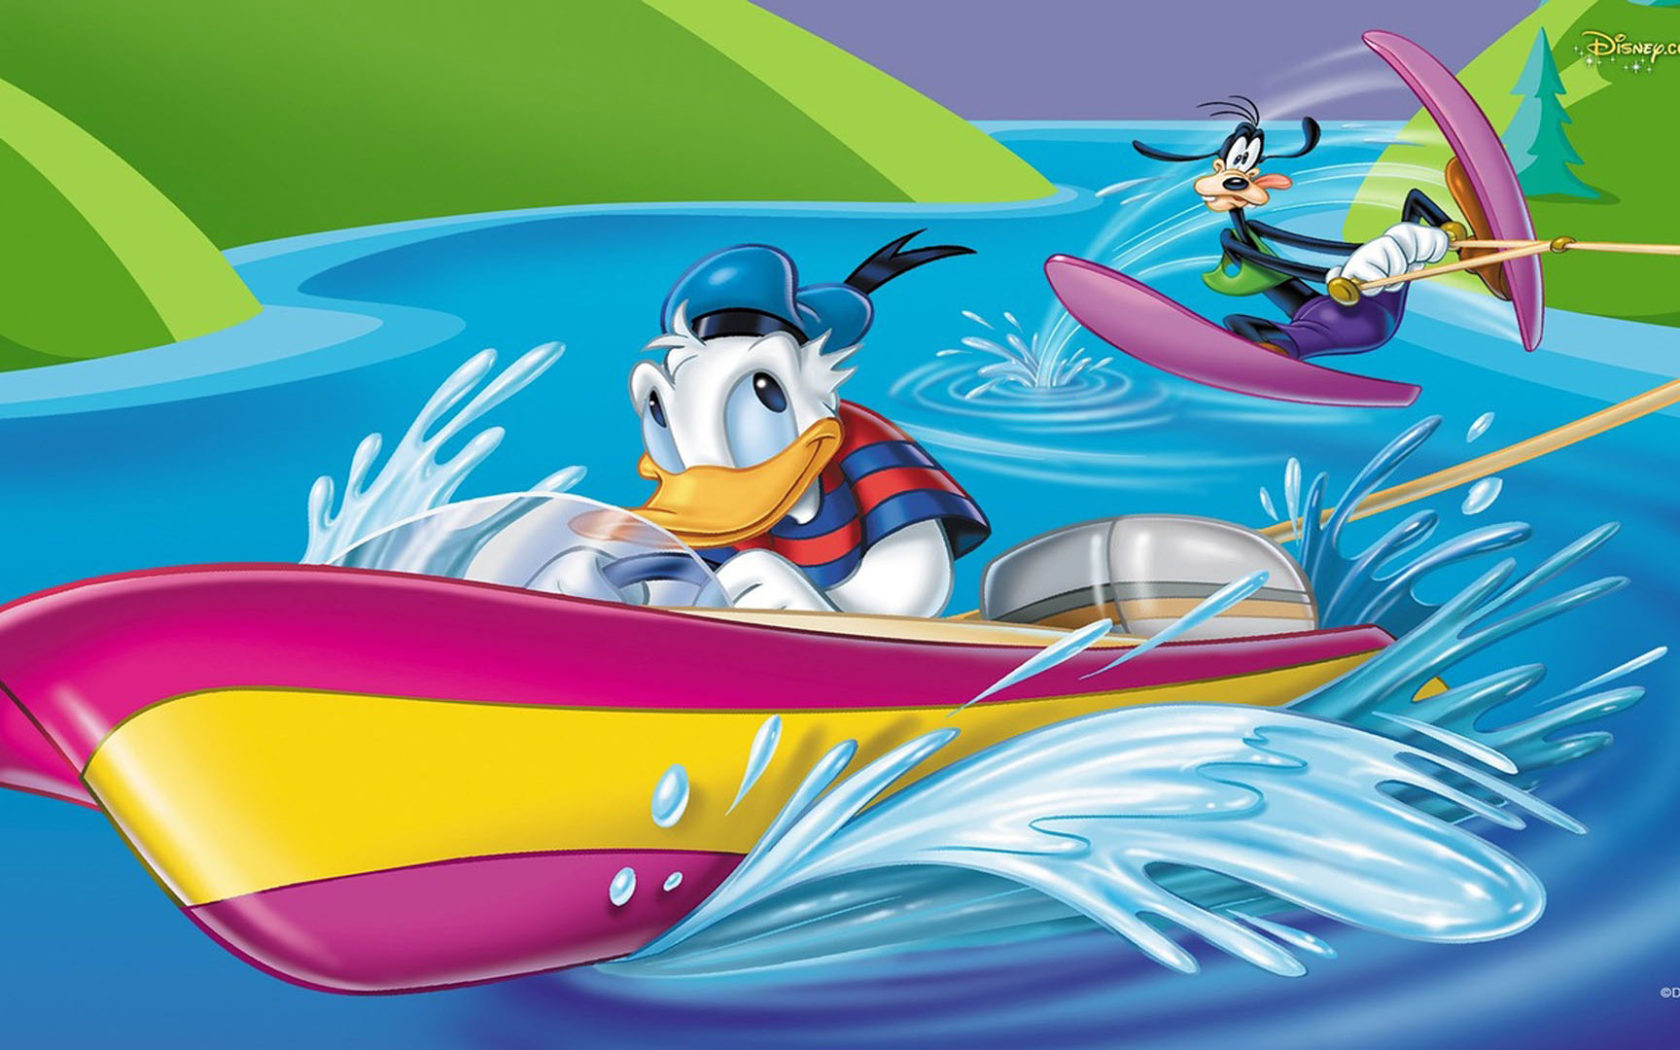 Donald Duck And Goofy Water Skiing Photo Collection Wallpaper Disney Theme 1920x1080, Wallpaper13.com